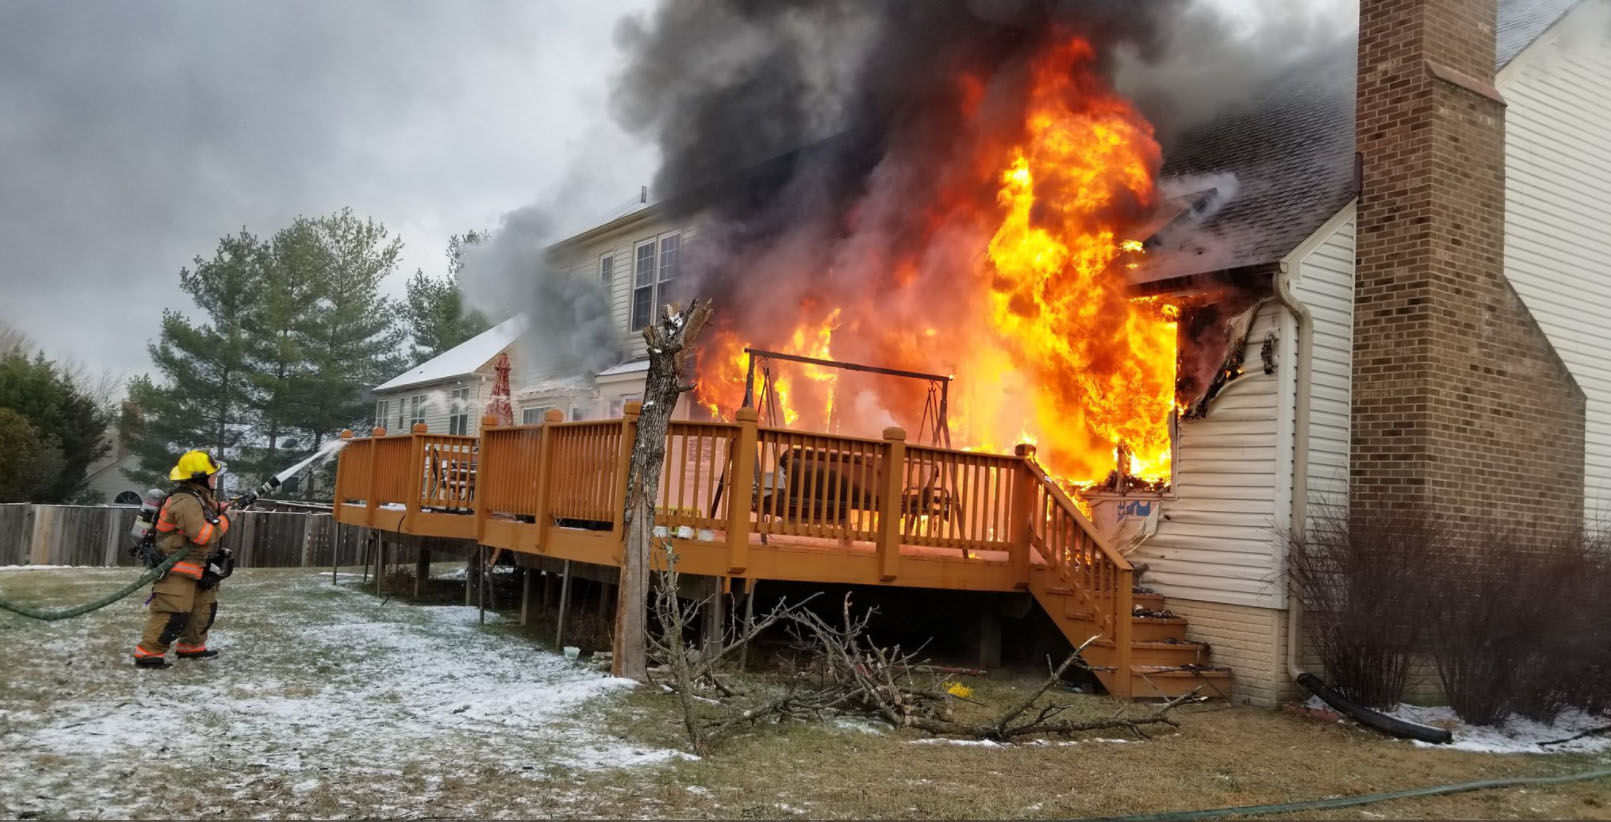 Montgomery County firefighters battle a fire in a  house on Outpost Drive in North Potomac, Maryland, Saturday, Dec. 30, 2017. (Courtesy Montgomery County Fire & Rescue)